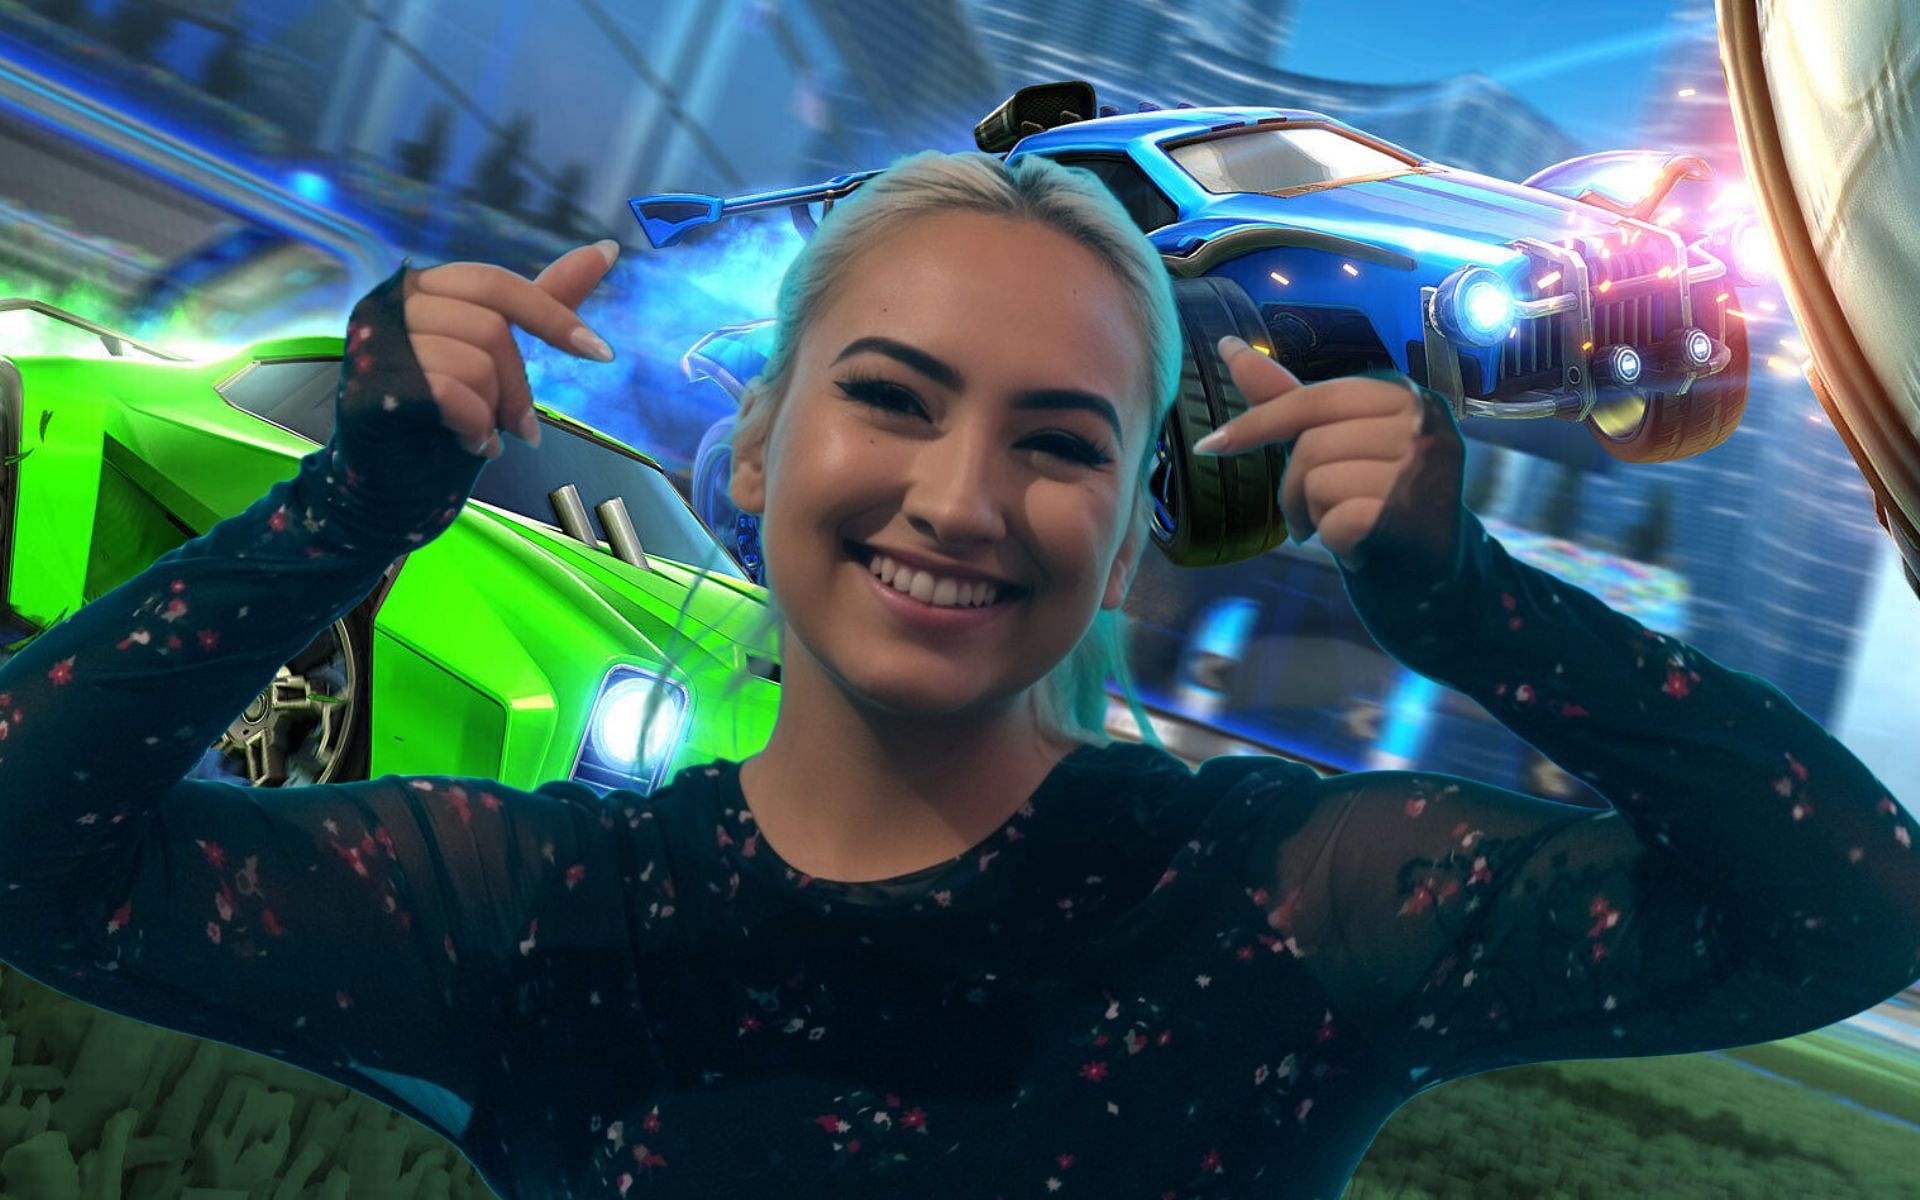 Rocket League streamer Herculyse was the talk of the town after EG fired her (Image via Rocket League, Herculyse/X, and Sportskeeda)